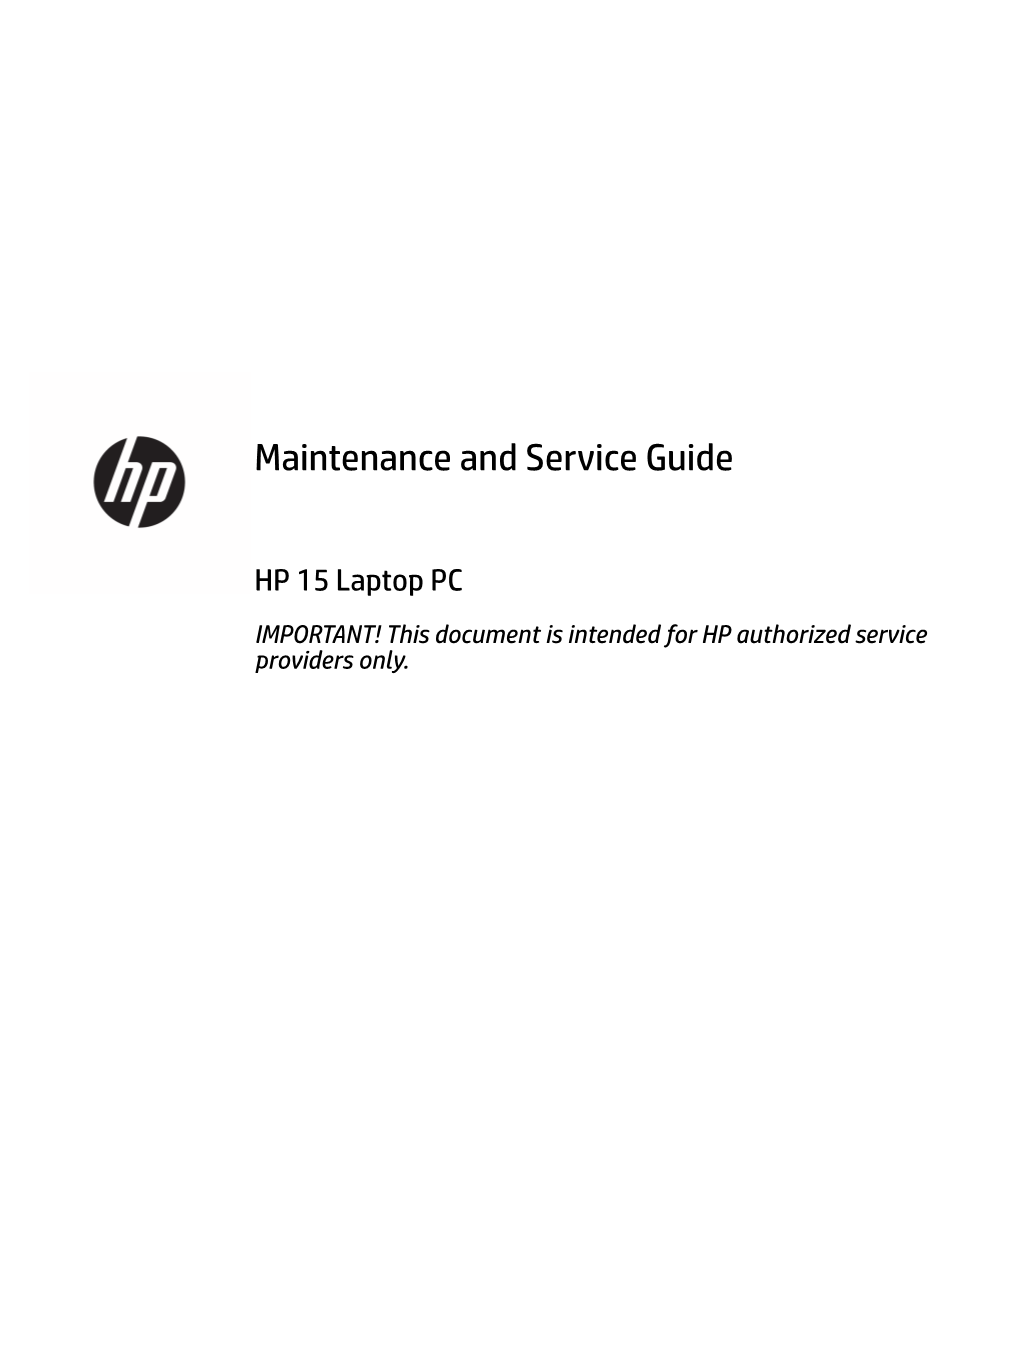 Maintenance and Service Guide HP 15 Laptop PC